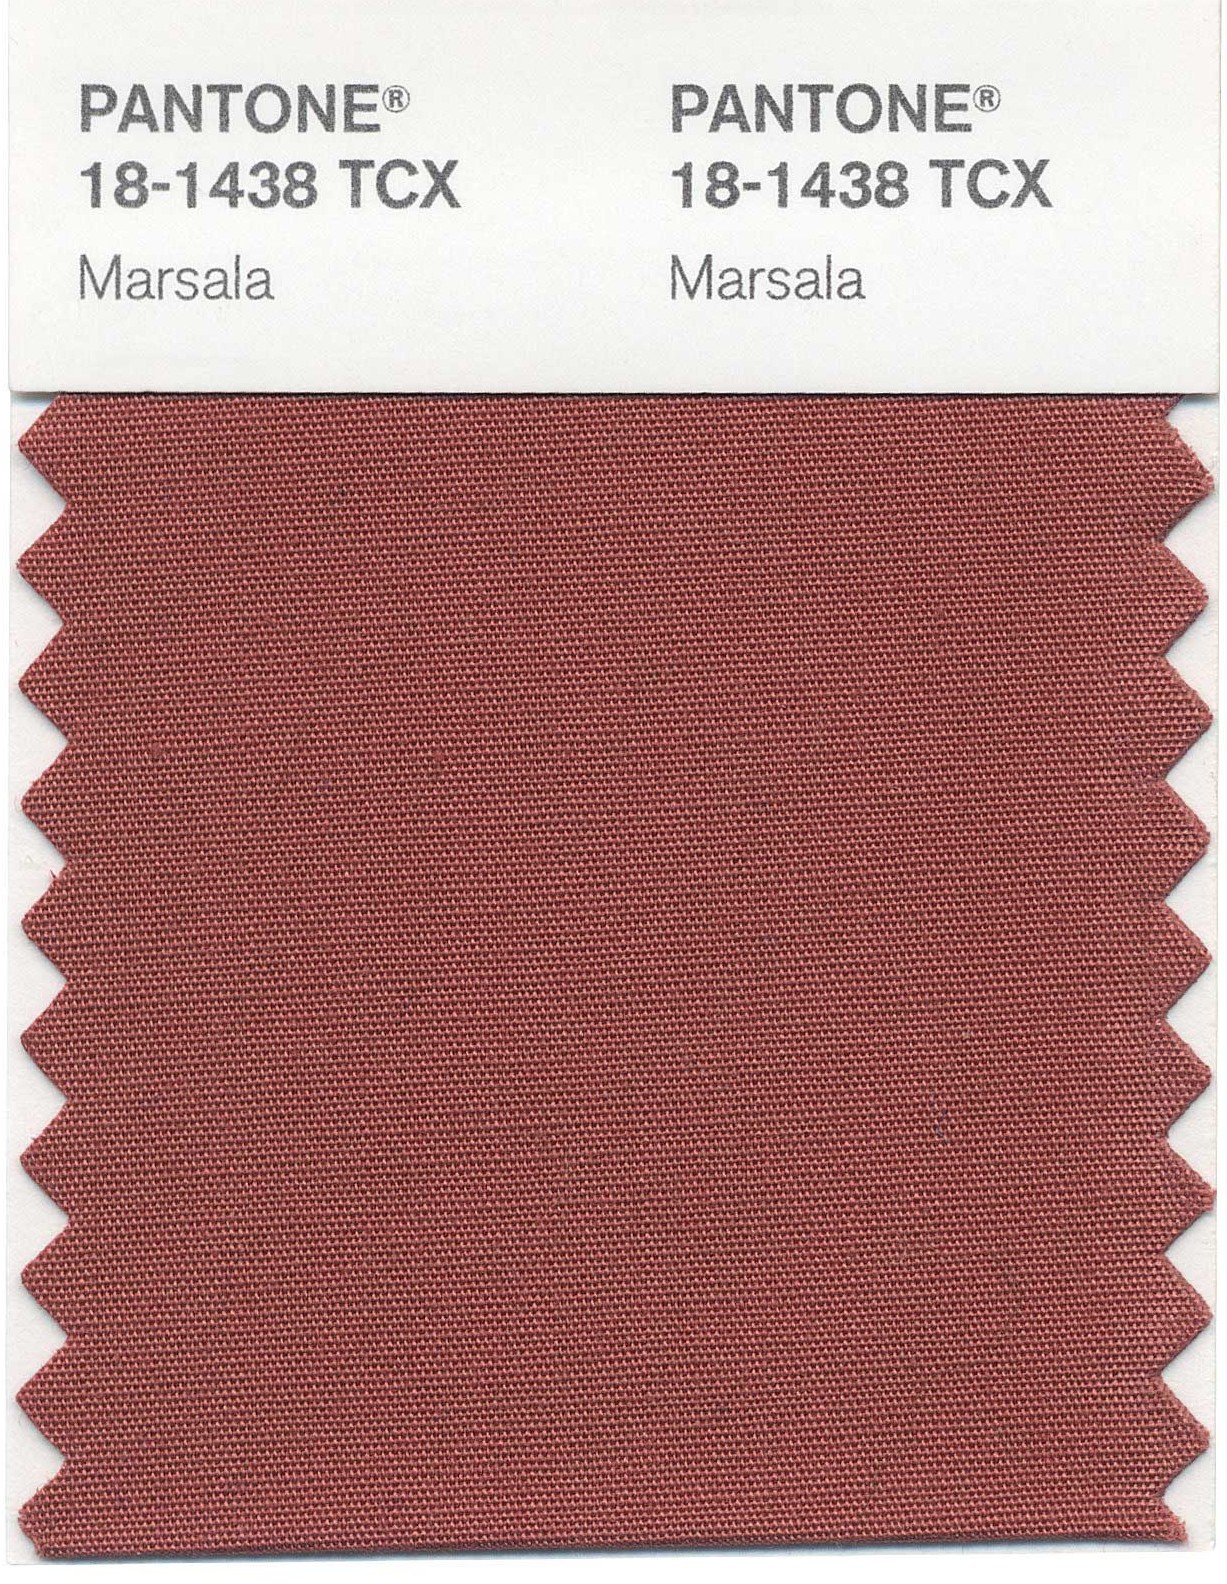 Pantone 2015 color of the year: Marsala